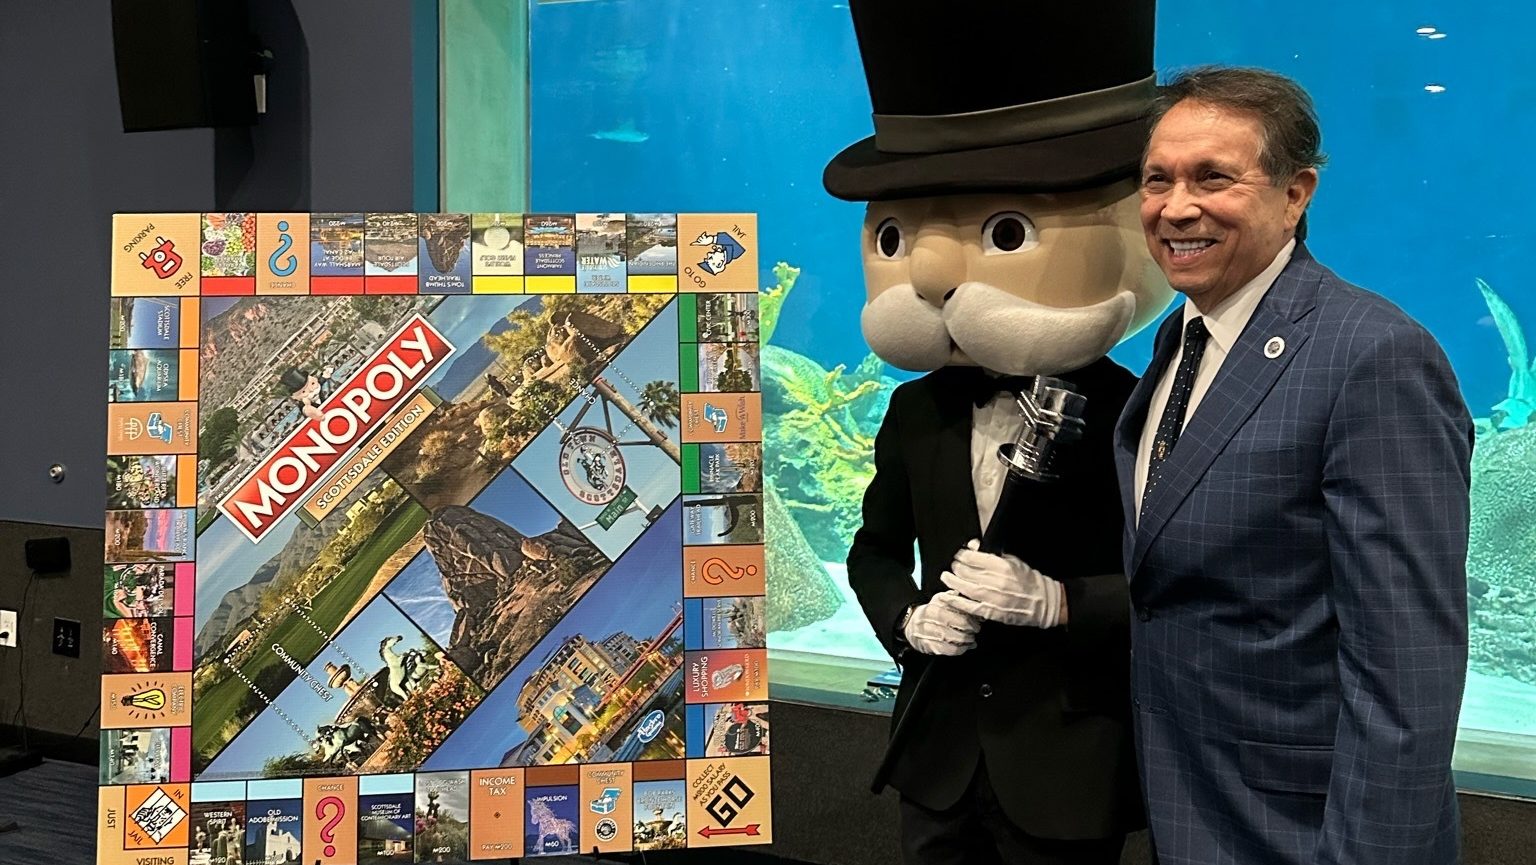 Game maker releases Scottsdale edition of Monopoly board game